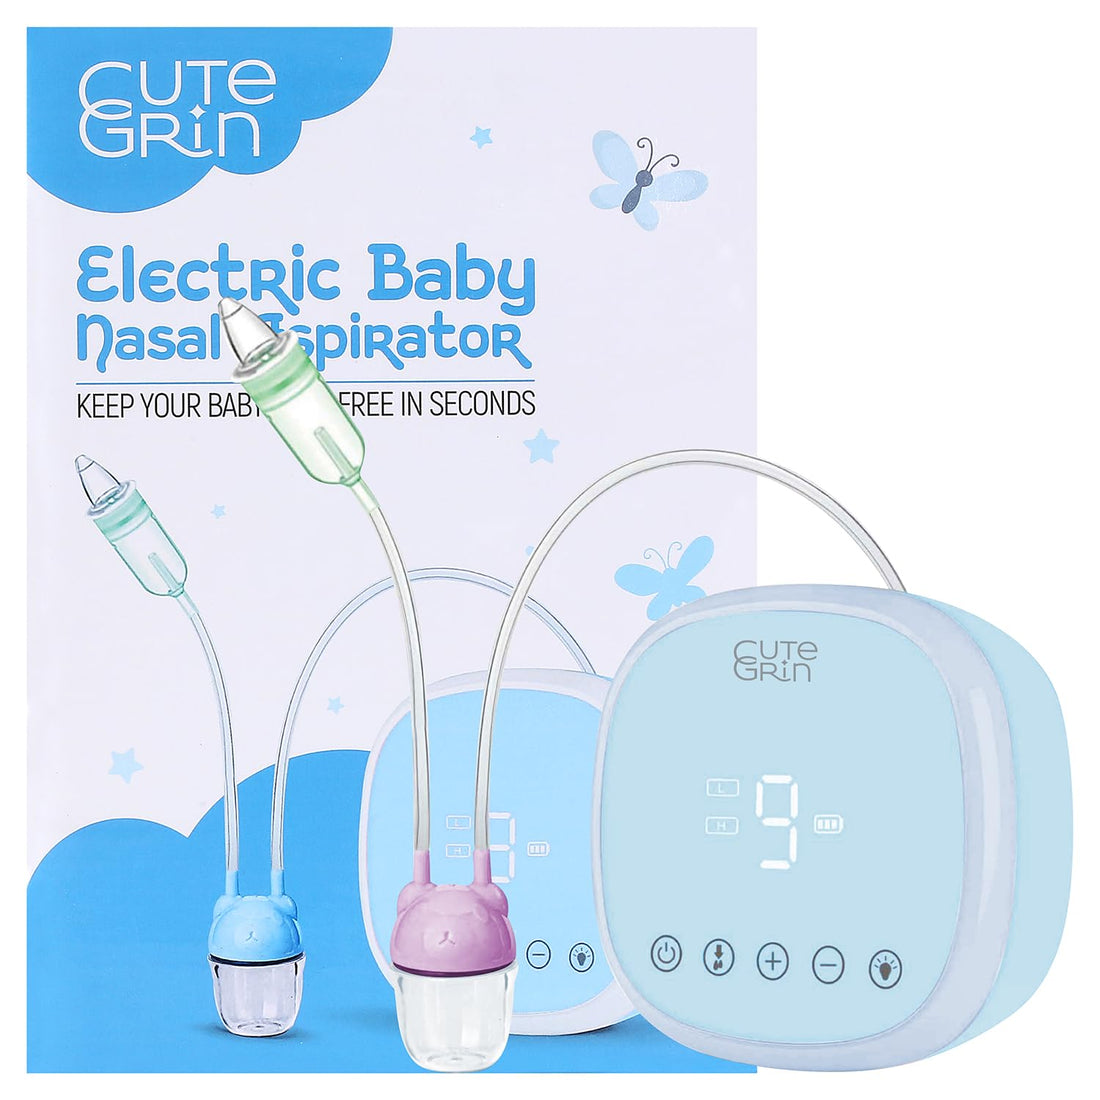 Baby Nose Sucker - Electric Nose Suction for Newborn Infant Toddler Kids Adult - Snot Booger Sucker Nasal Aspirator - Electronic Mucus Boogie Vacuum